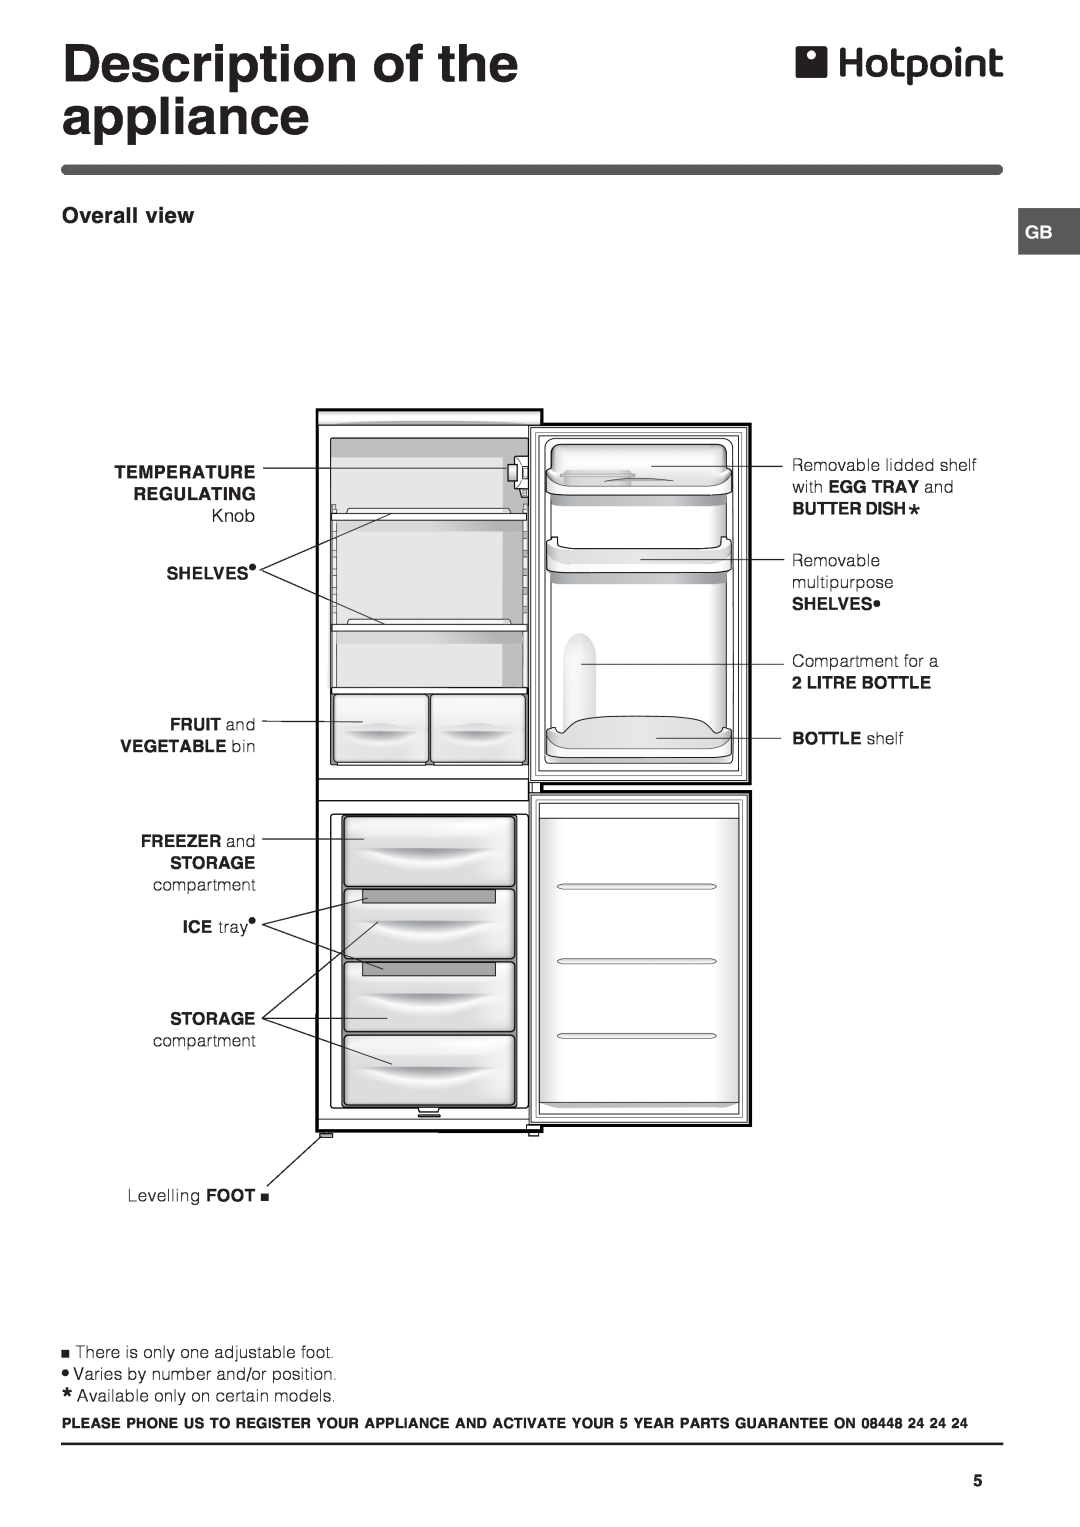 Hotpoint RFA52 manual Description of the appliance, Overall view 